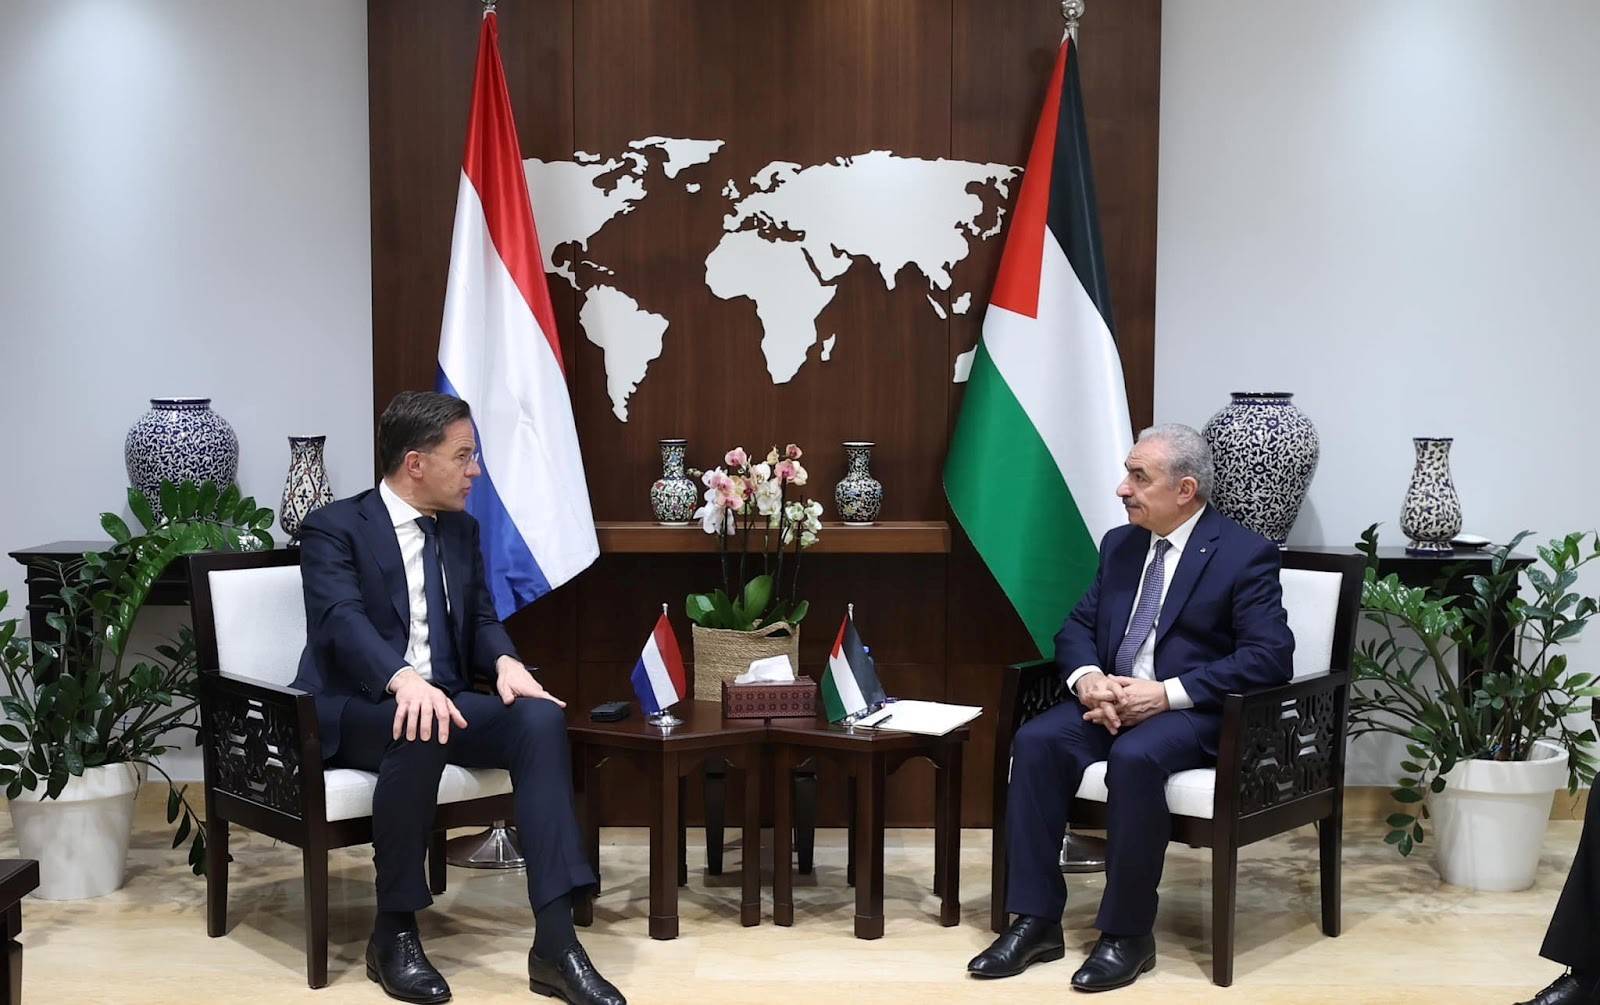 Mark Rutte, the outgoing Dutch Prime minister met with Palestinian Authority Prime Minister Mohammad Shtayyeh in Ramallah to discuss the war.